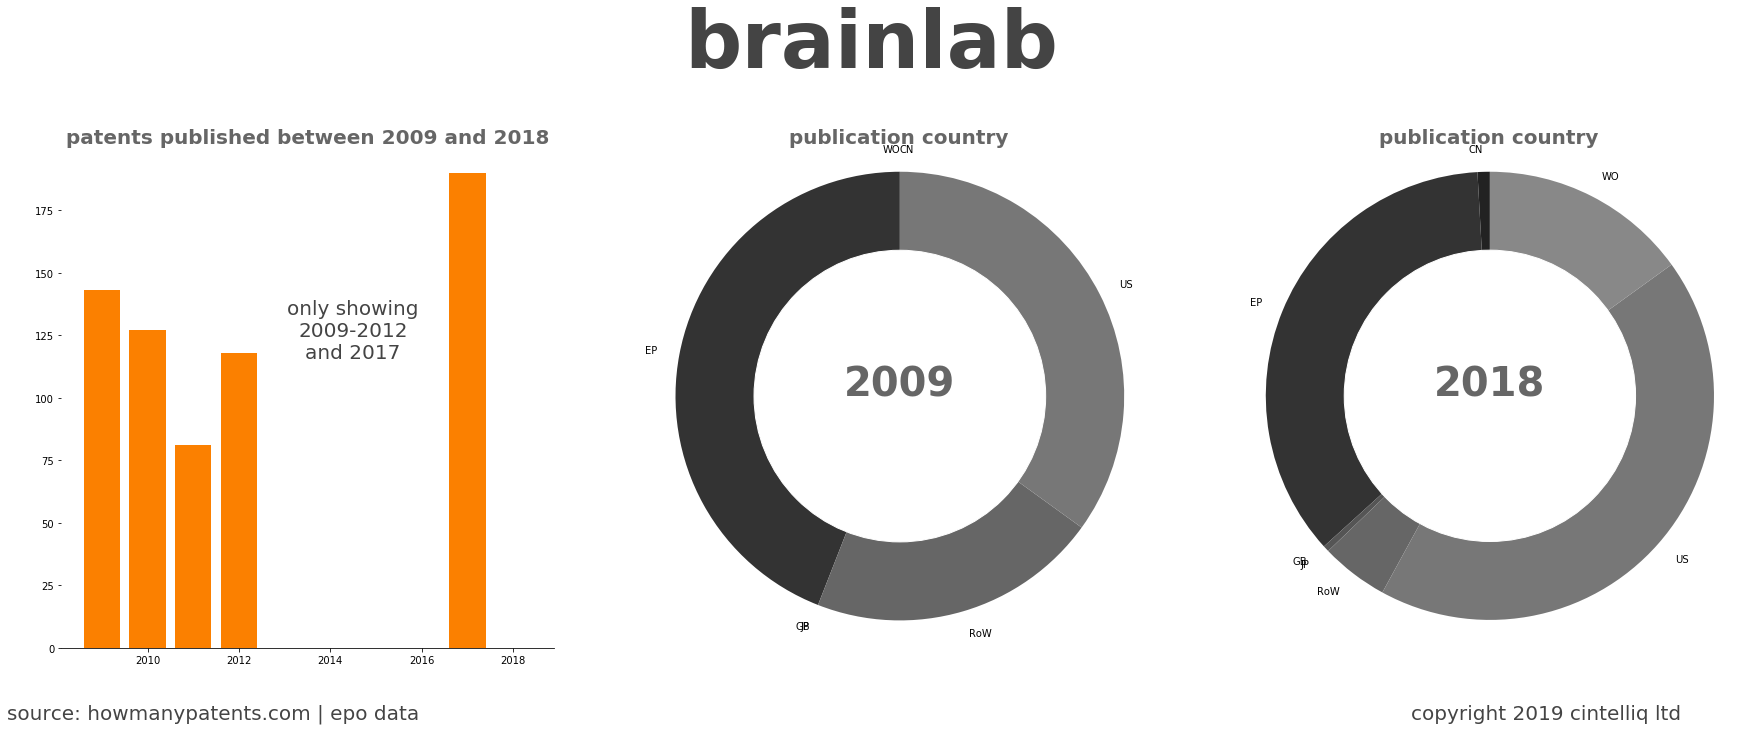 summary of patents for Brainlab